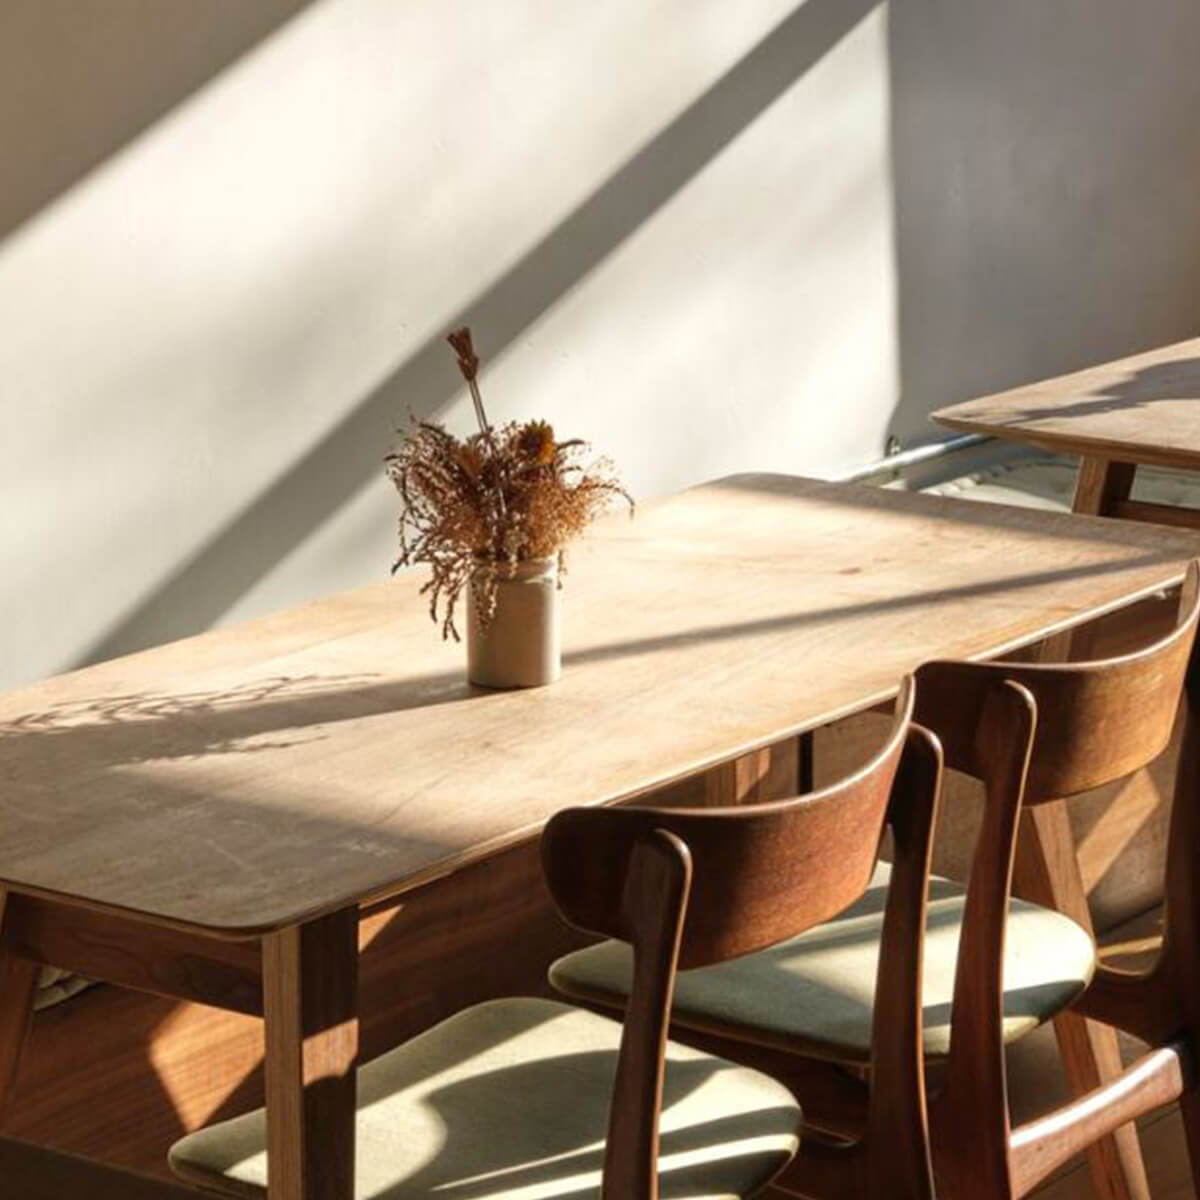 Popham Cafe tables and chairs in sunlight